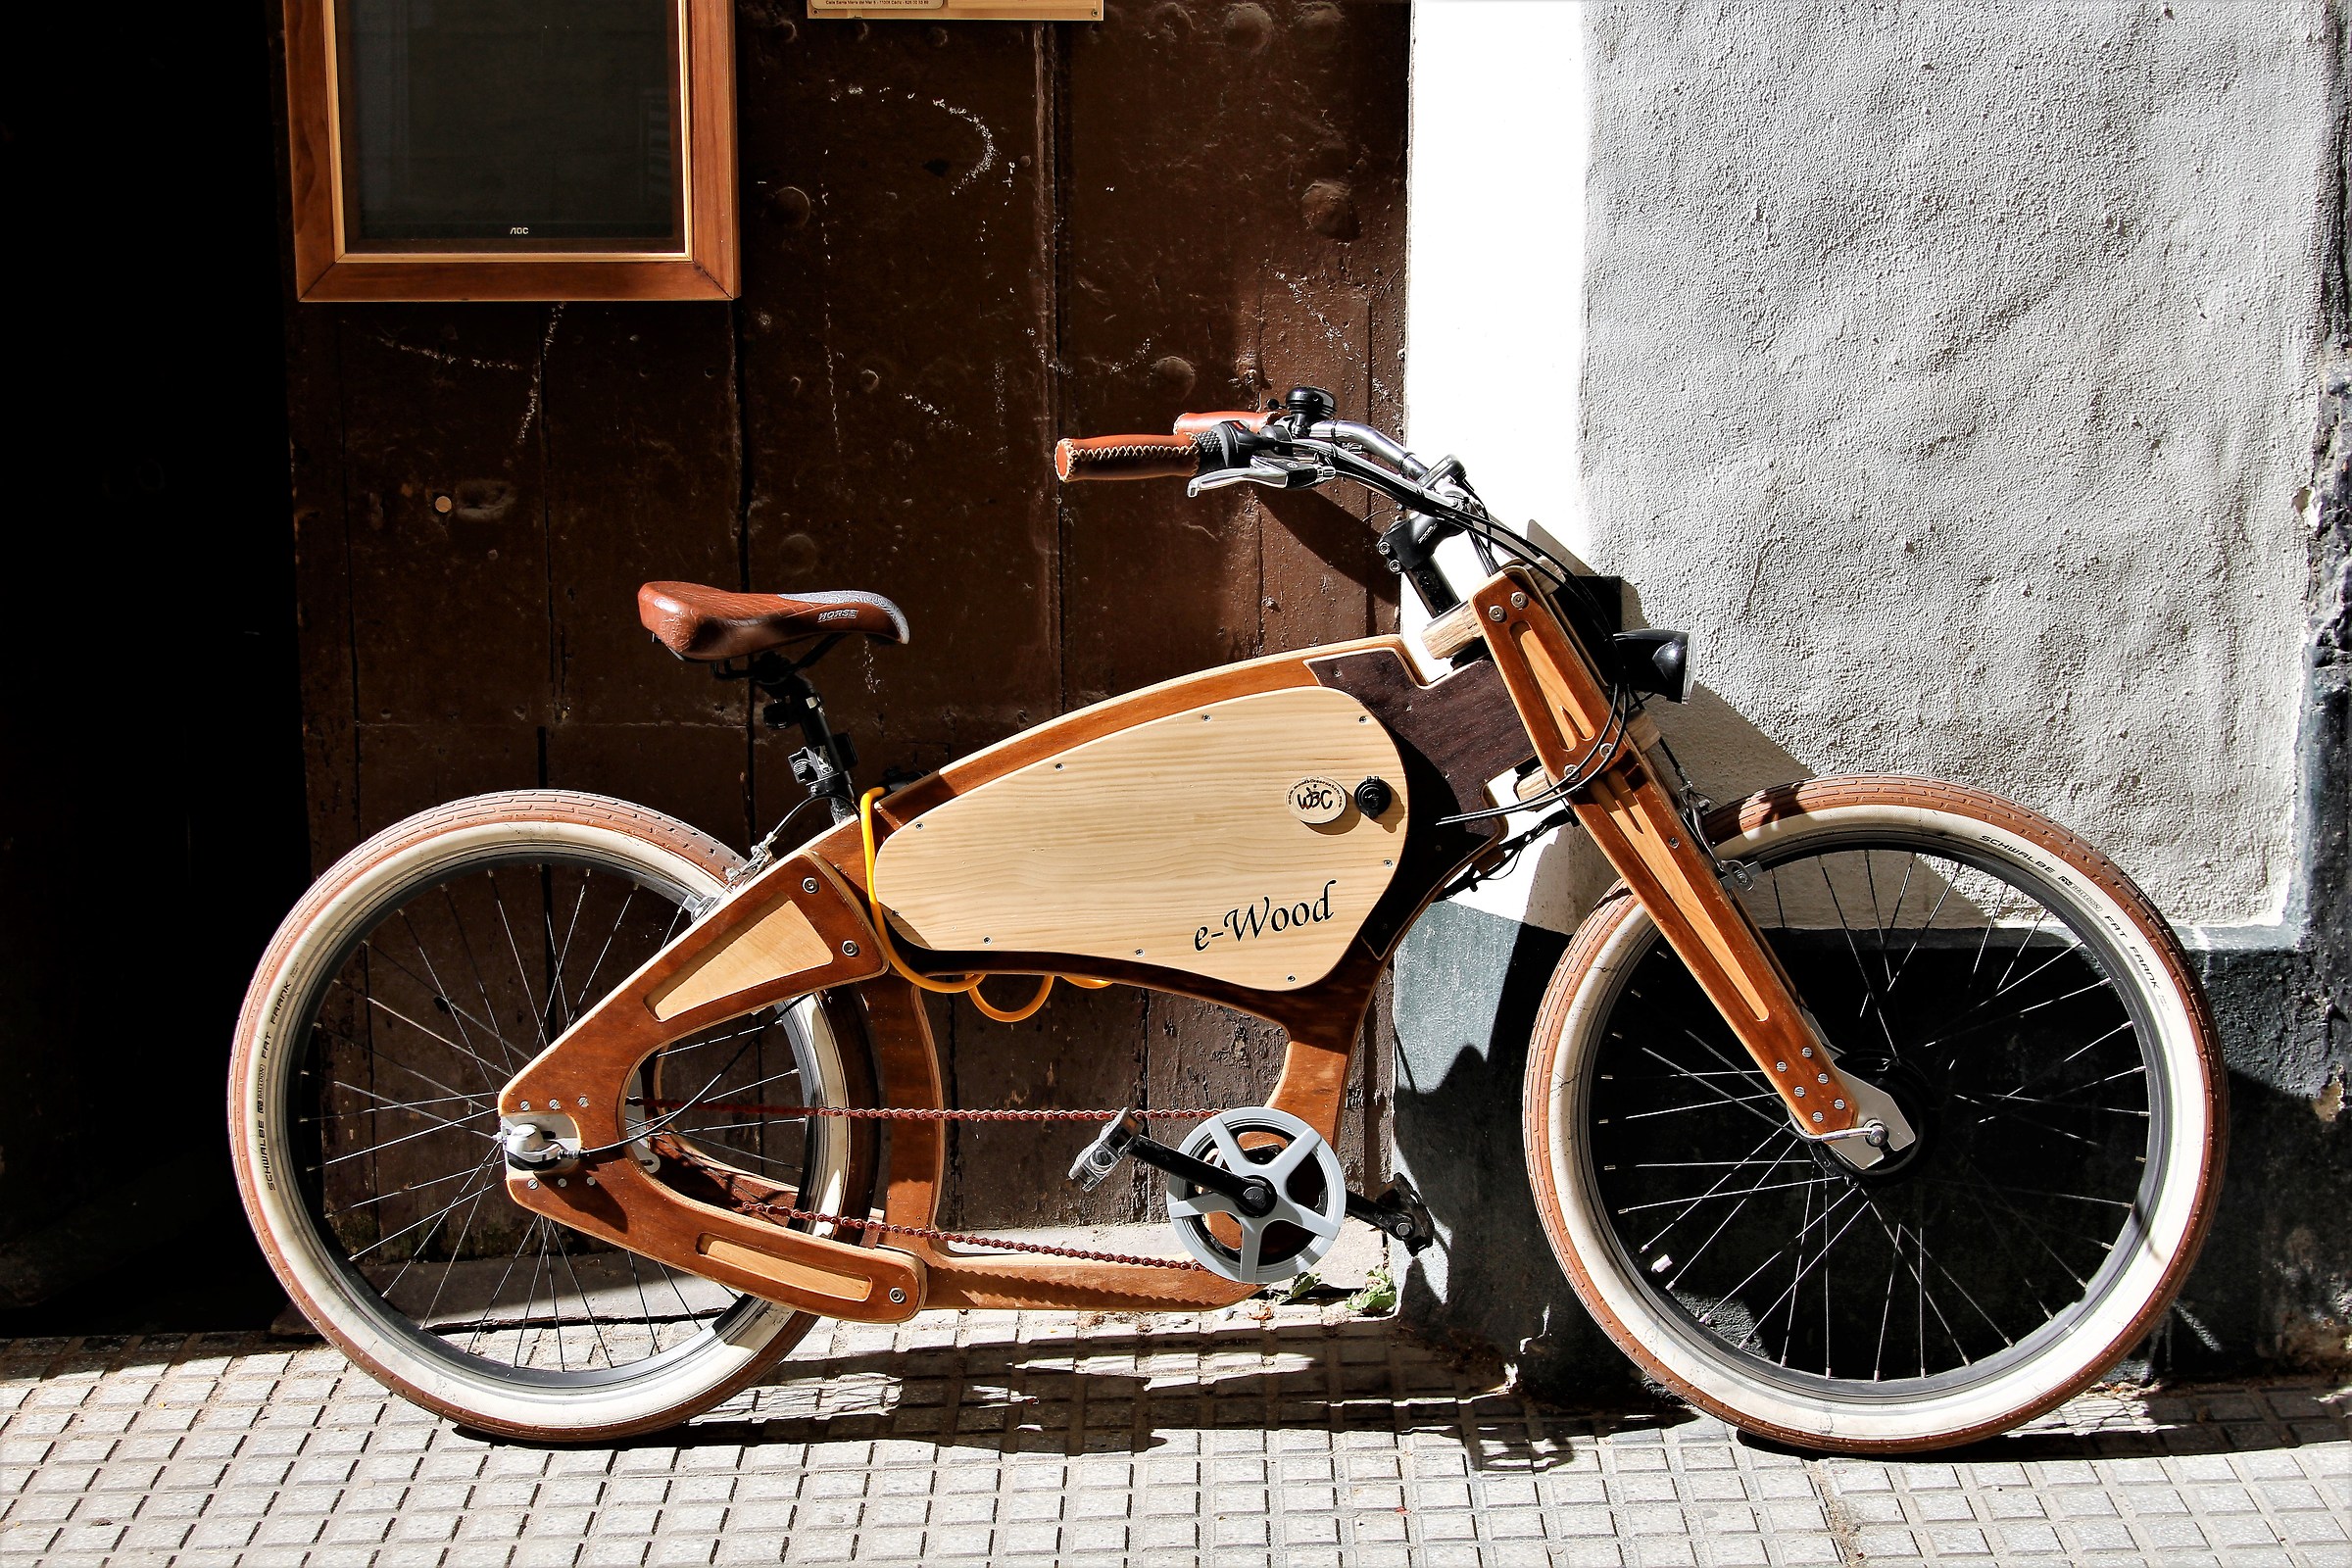 The wooden bicycle...